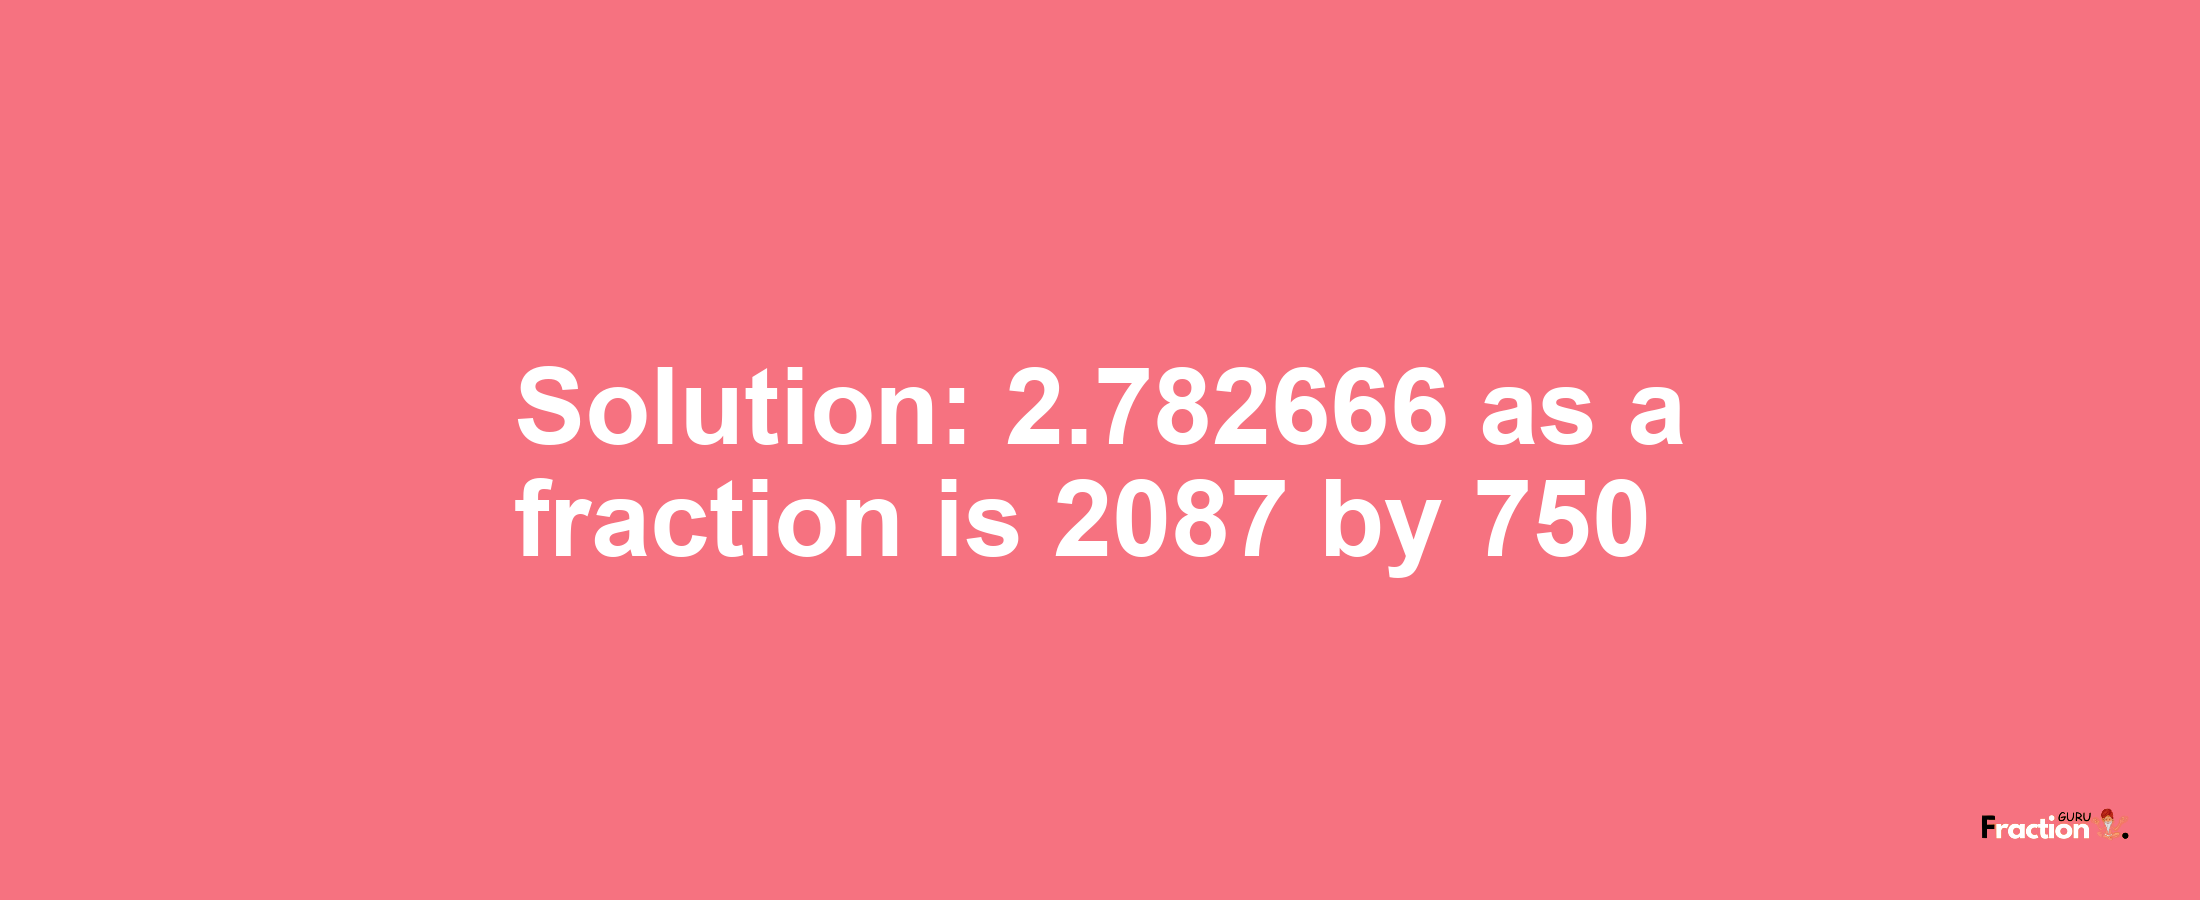 Solution:2.782666 as a fraction is 2087/750